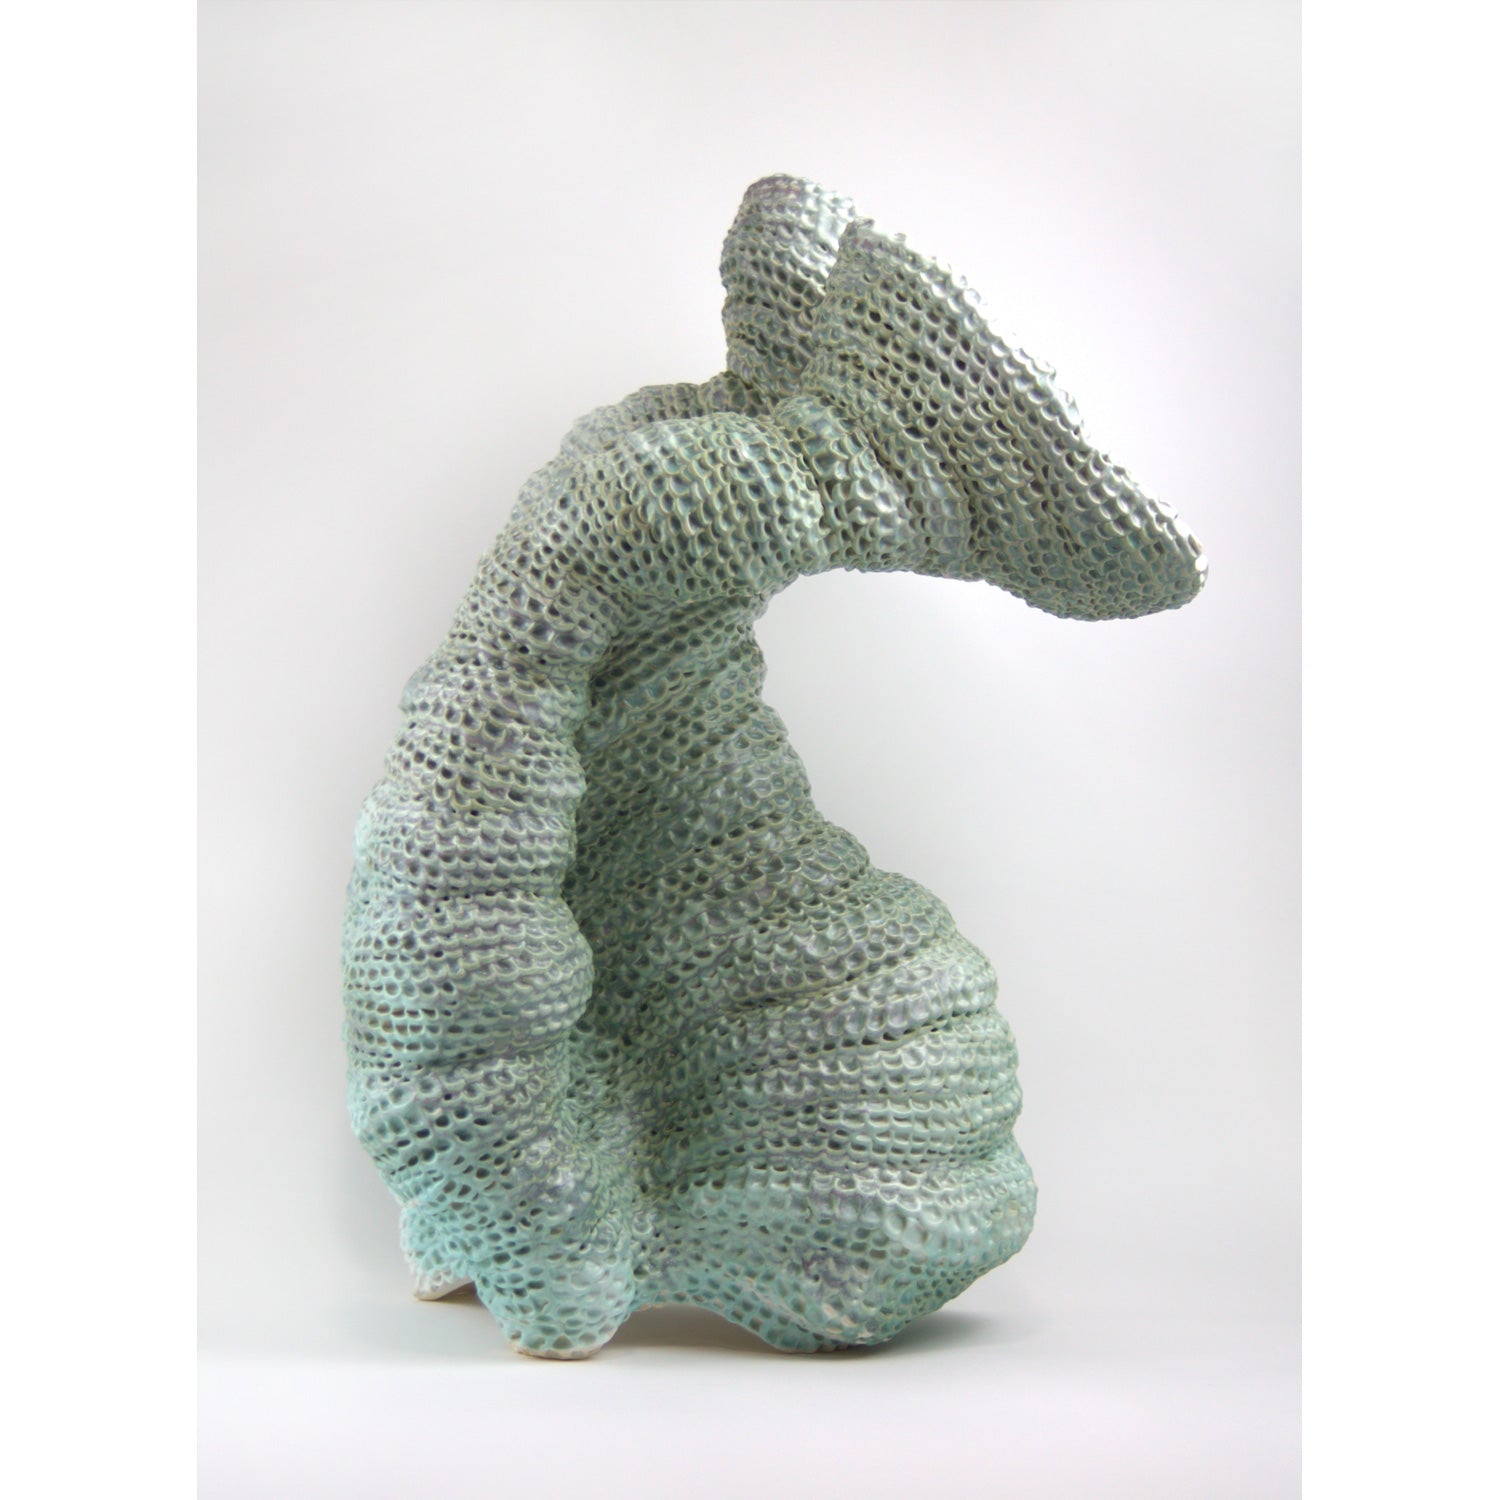 Kim Ross - Turquoise Form 4, 24" x 17" x 11"